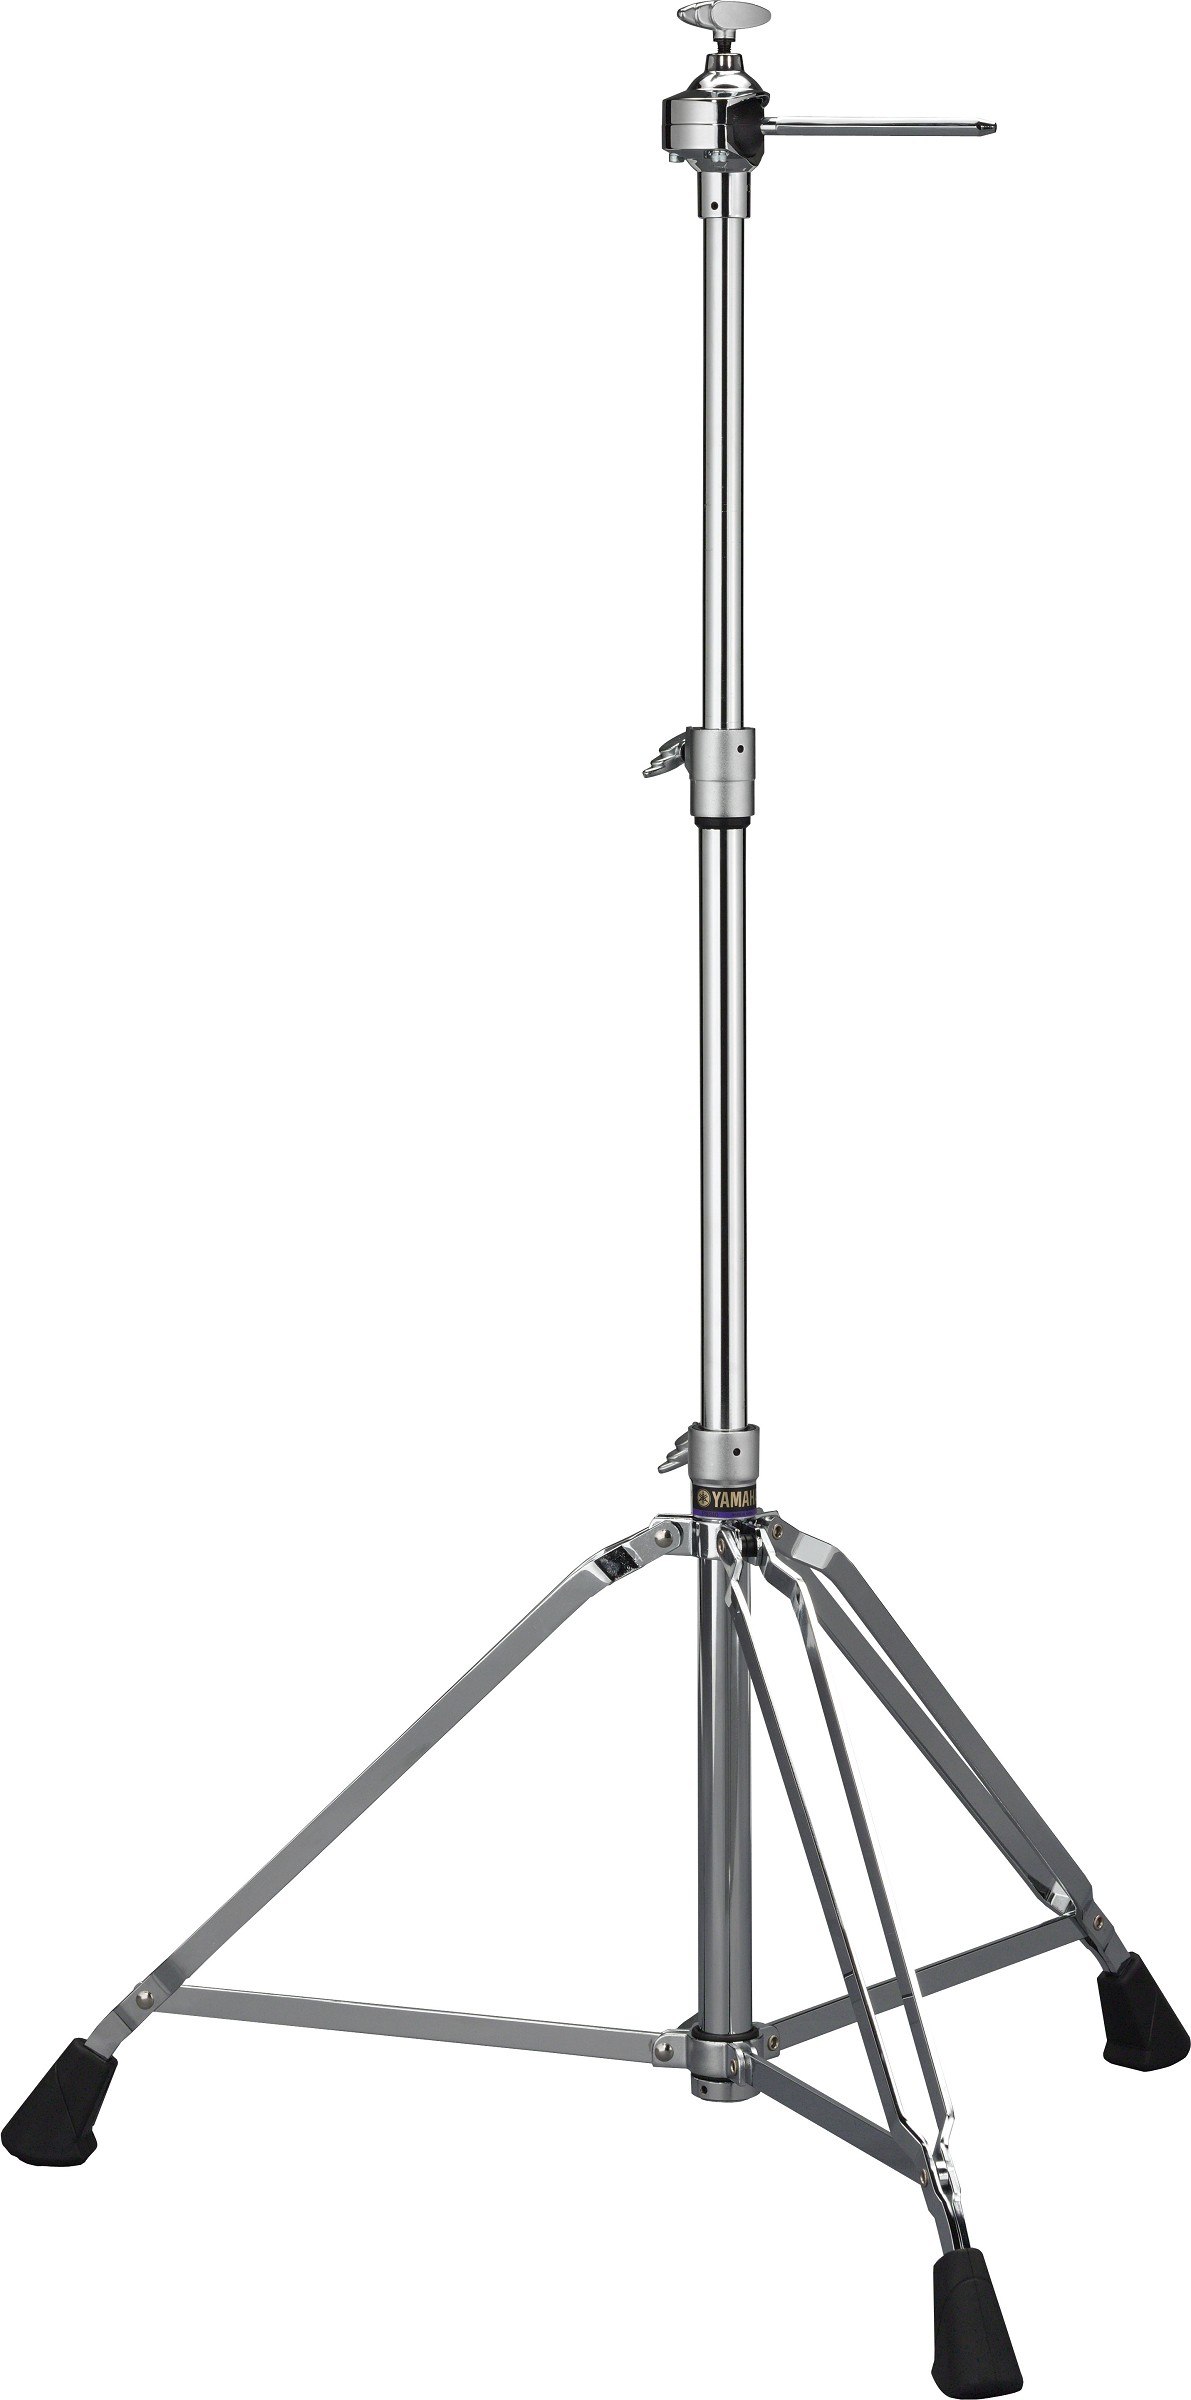 Yamaha PS-940 Percussion Stand für DTXM-12 Multi Pad